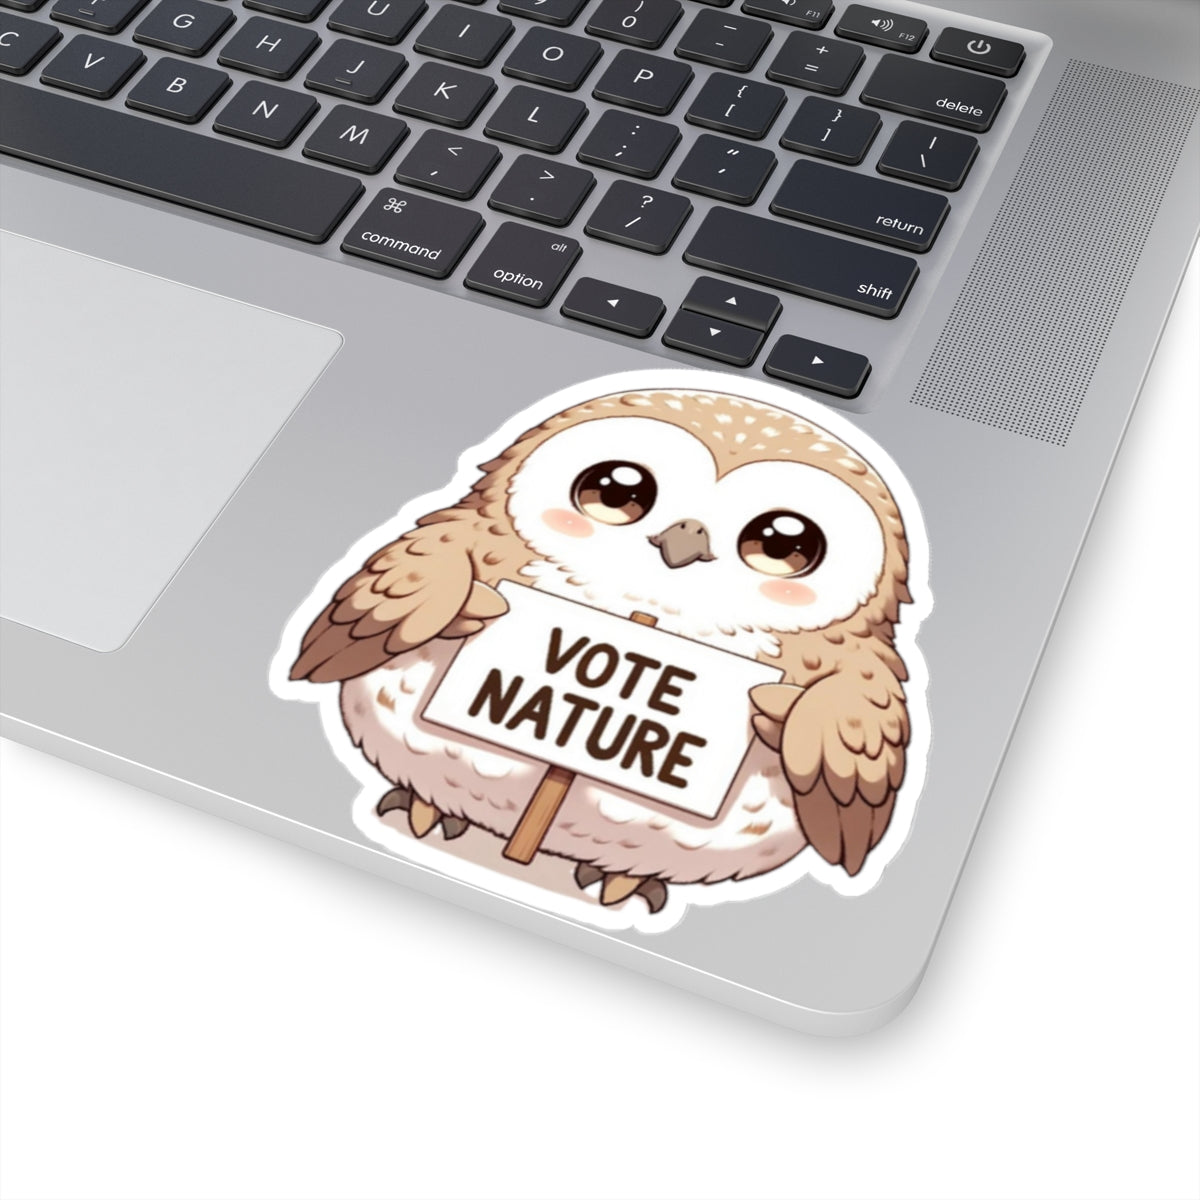 Inspirational Cute Owl Statement vinyl Sticker: Vote Nature! for laptop, kindle, phone, ipad, instrument case, notebook, mood board, or wall